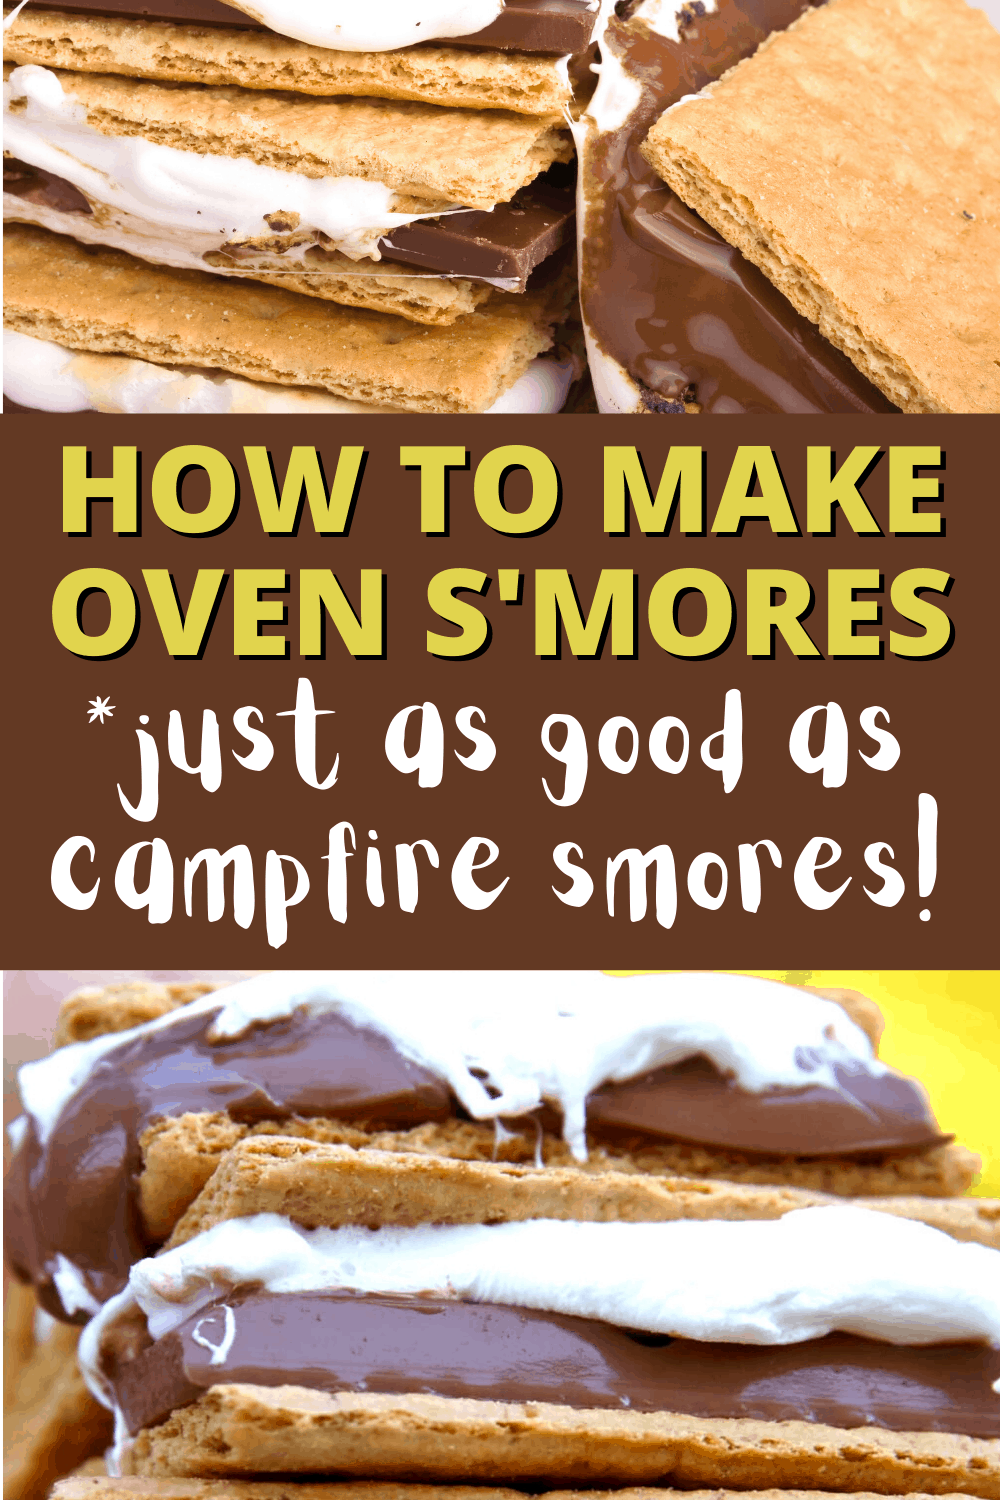 oven smores recipe - how to make smores in oven text over images of sheet pan smore recipes in oven